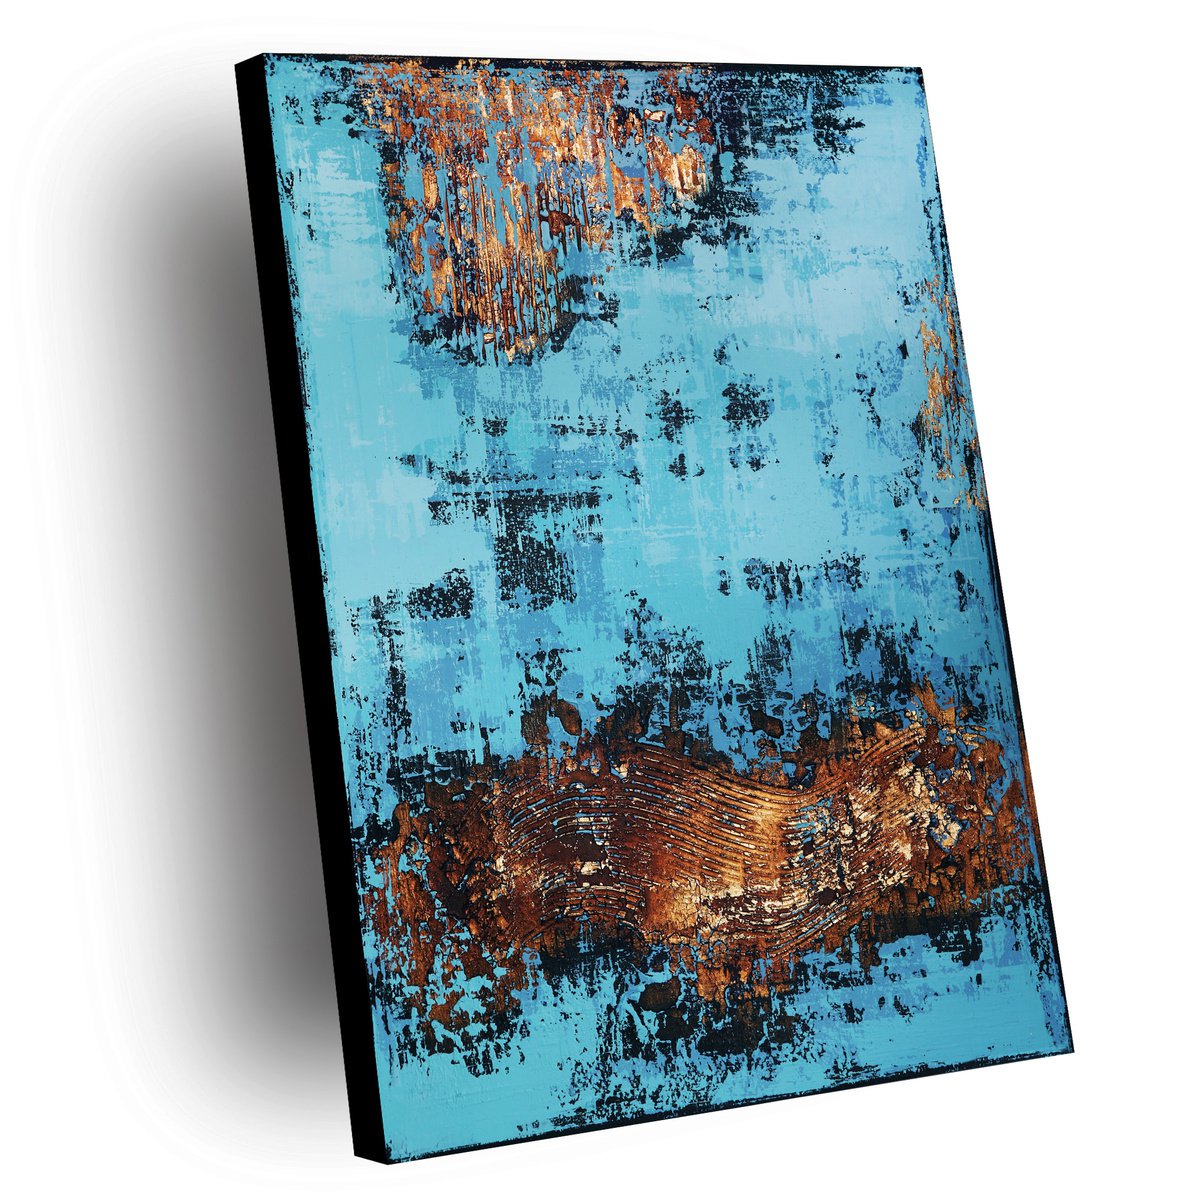 VENEZIA - ABSTRACT ACRYLIC PAINTING TEXTURED * TURQUOISE BLUE * COPPER * GOLD by Inez Froehlich